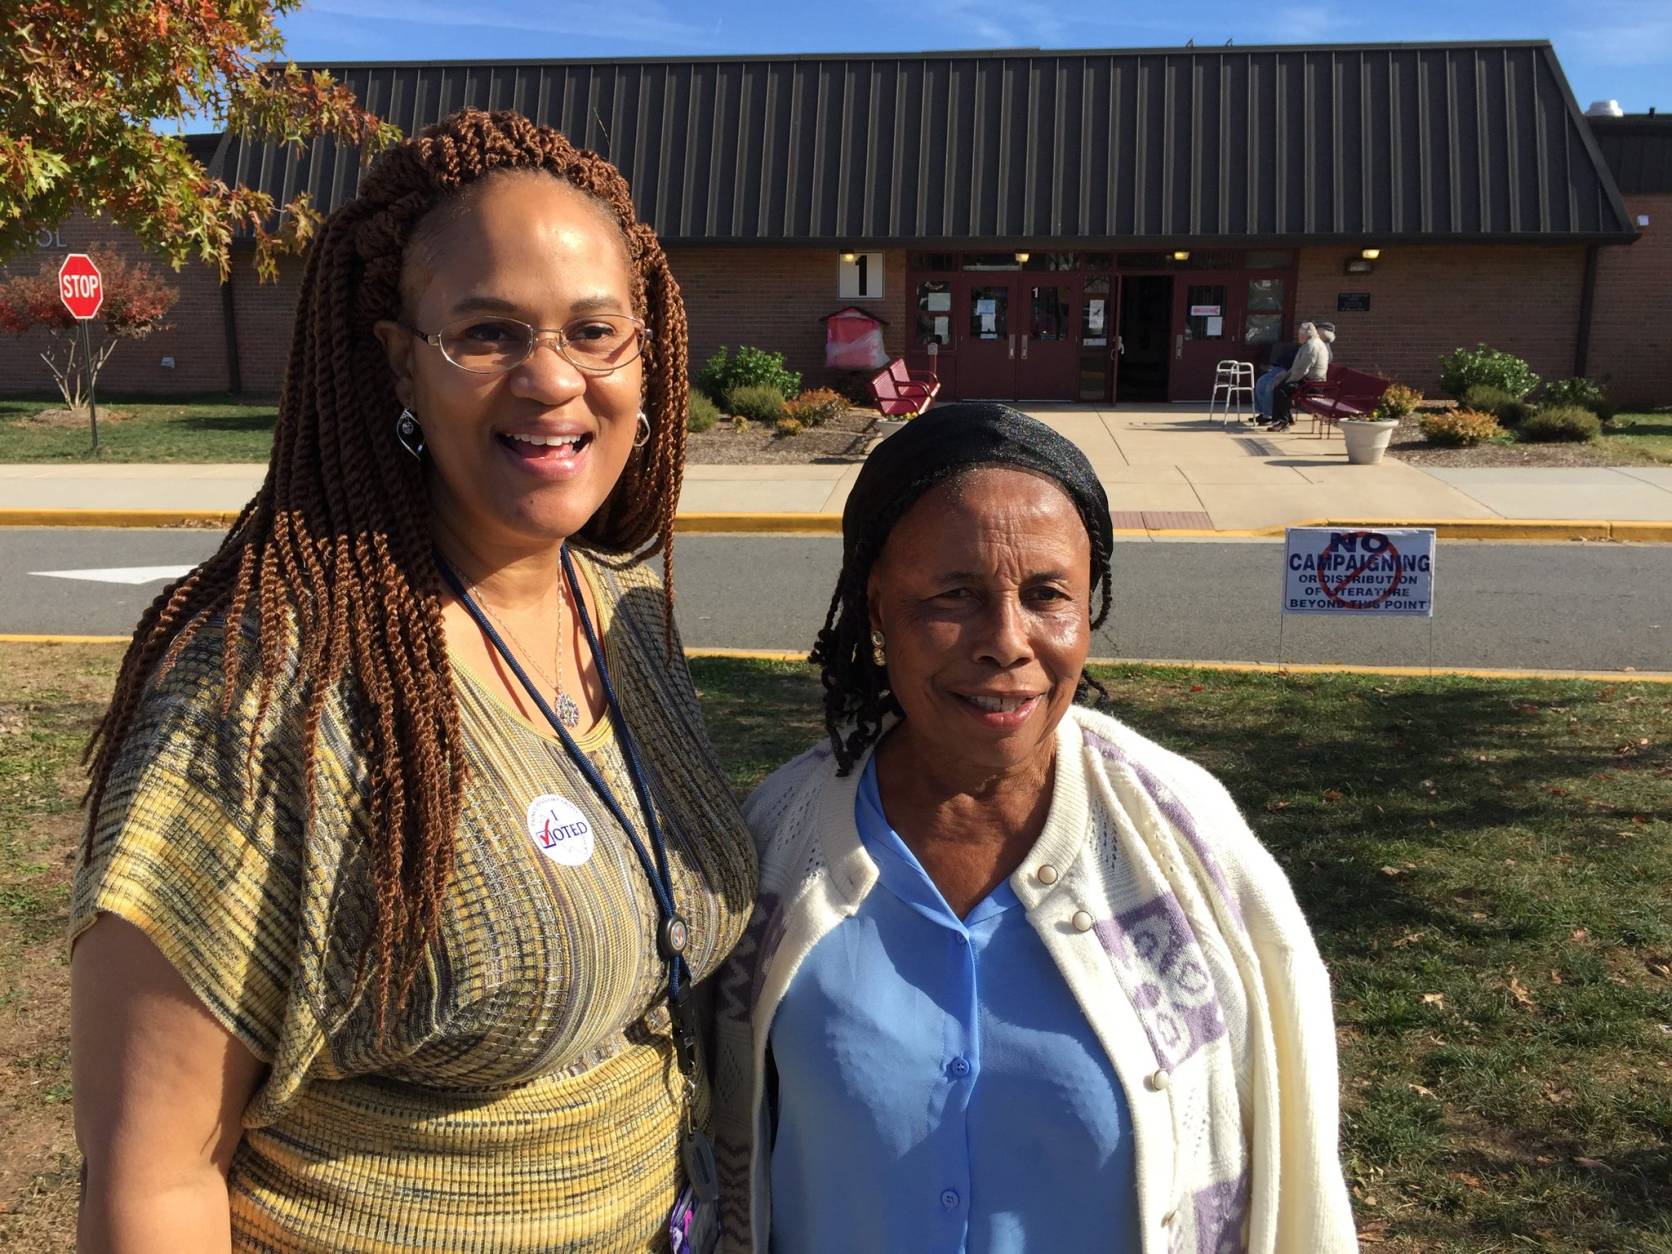 "I'm happy tonight will be the end to all this," said Kathleen Martin, of Northern Virginia precinct 408. Next to her, Debrah Allotey said, "God will choose the best person." (WTOP/Kristi King)